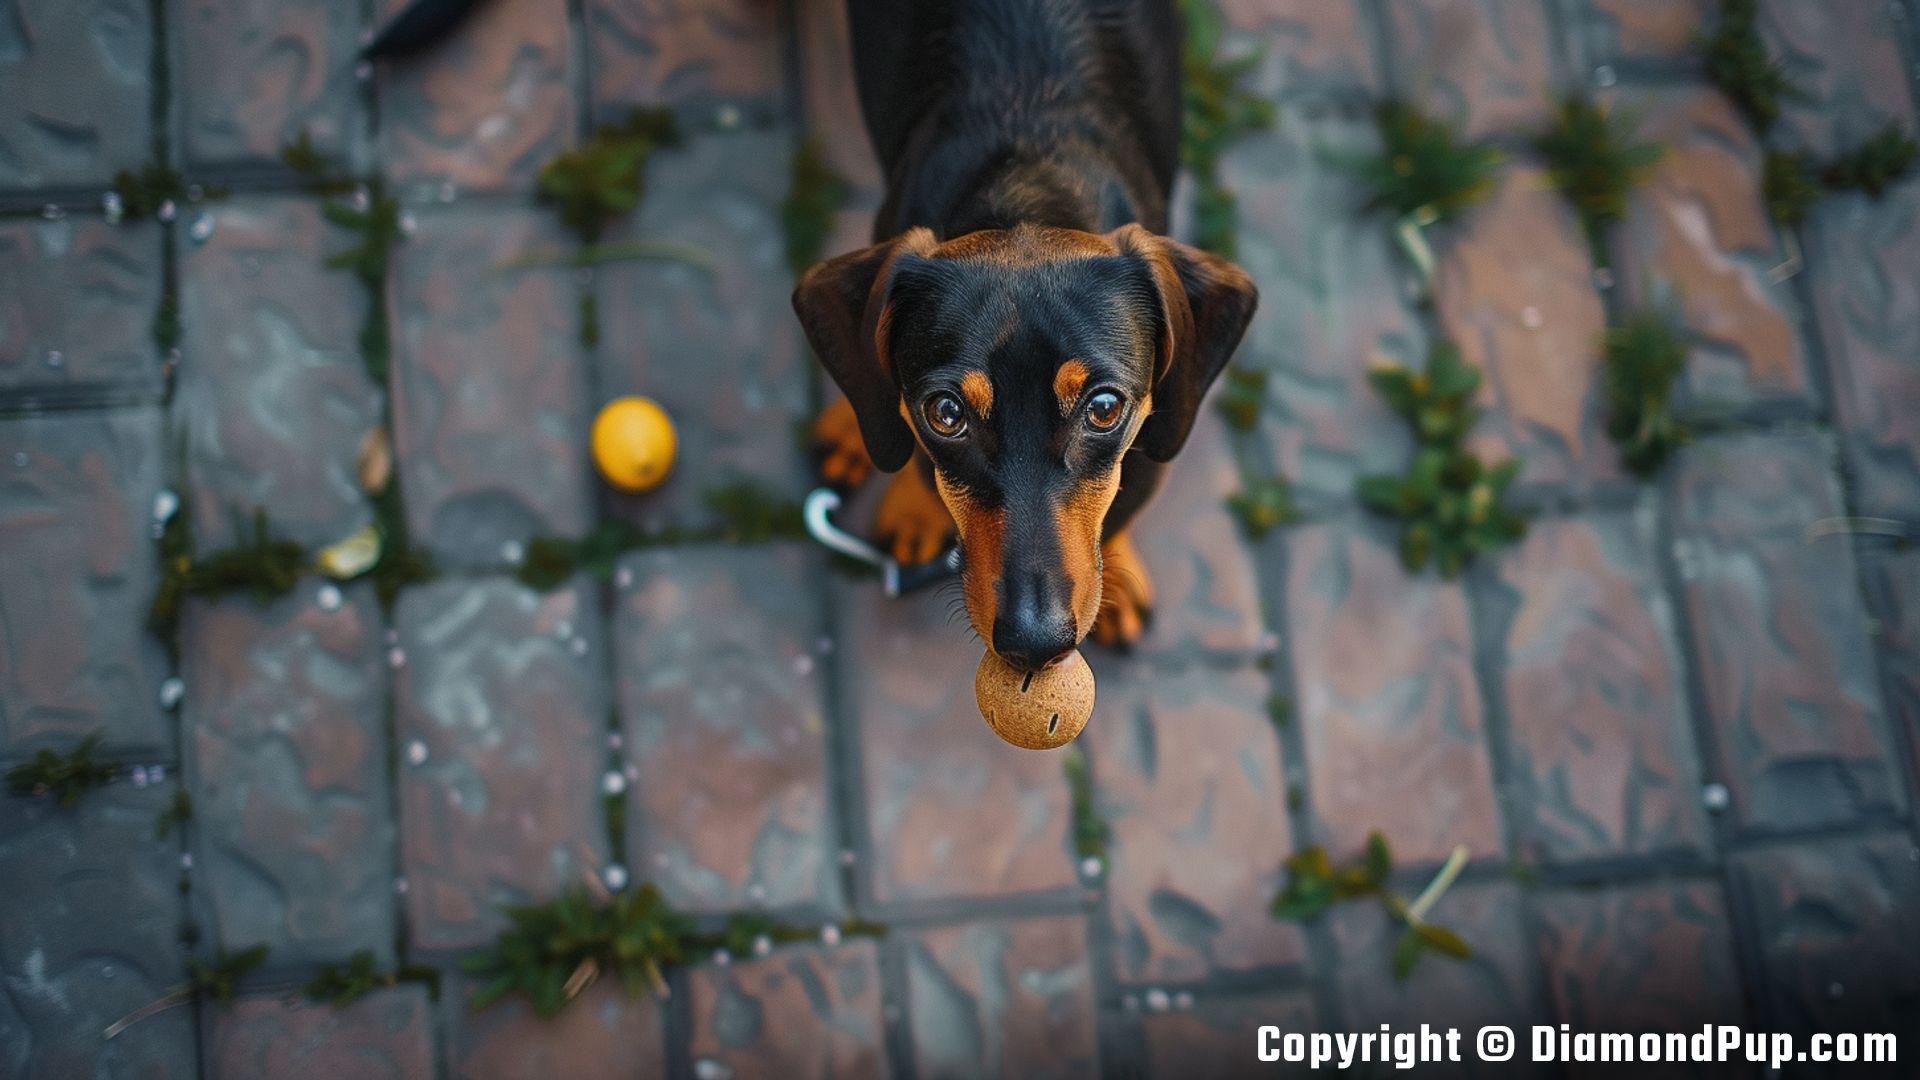 Photograph of an Adorable Dachshund Snacking on Chicken